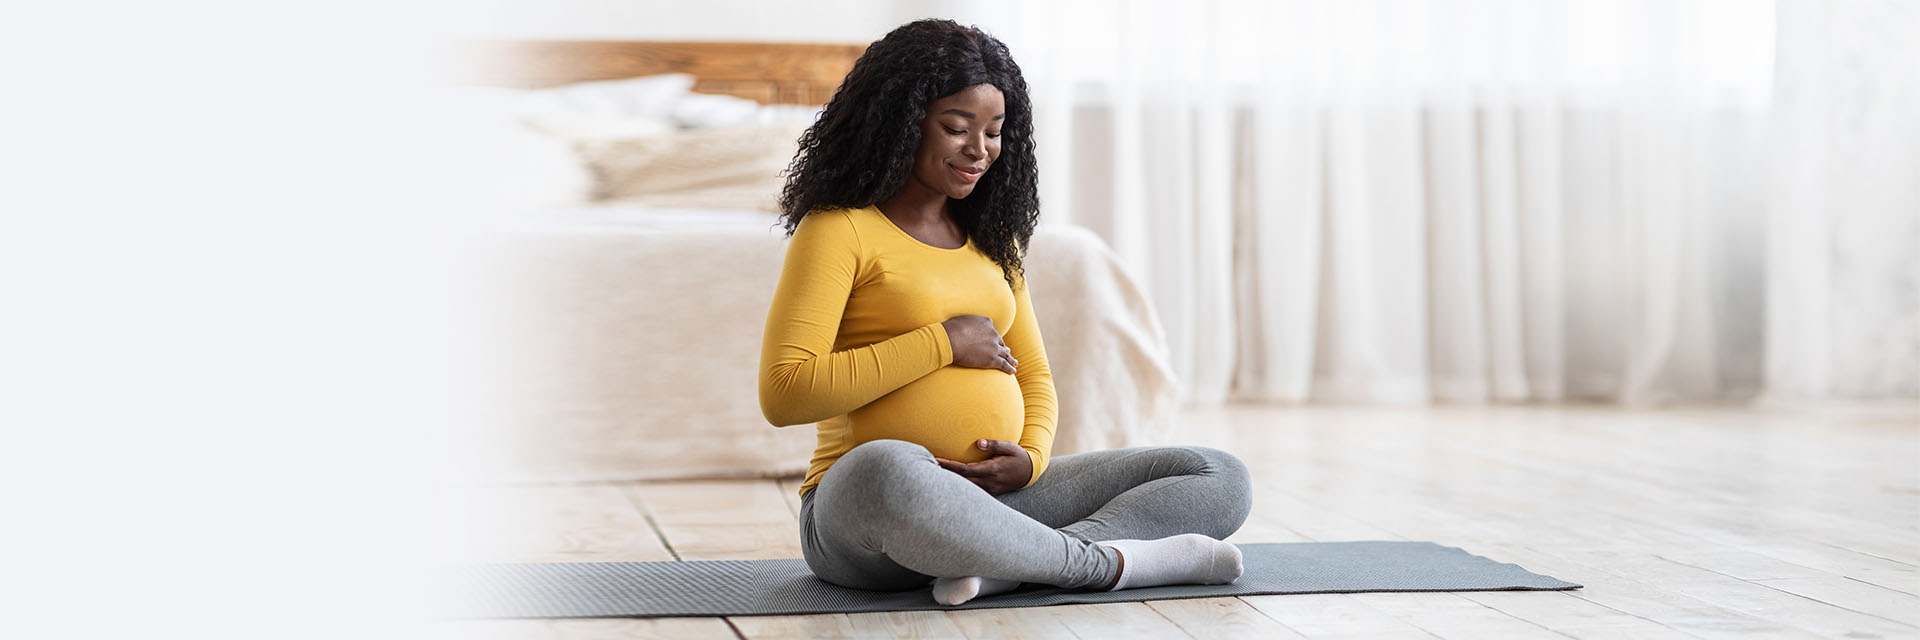 Pregnant woman sitting on a yoga mat and holding her belly